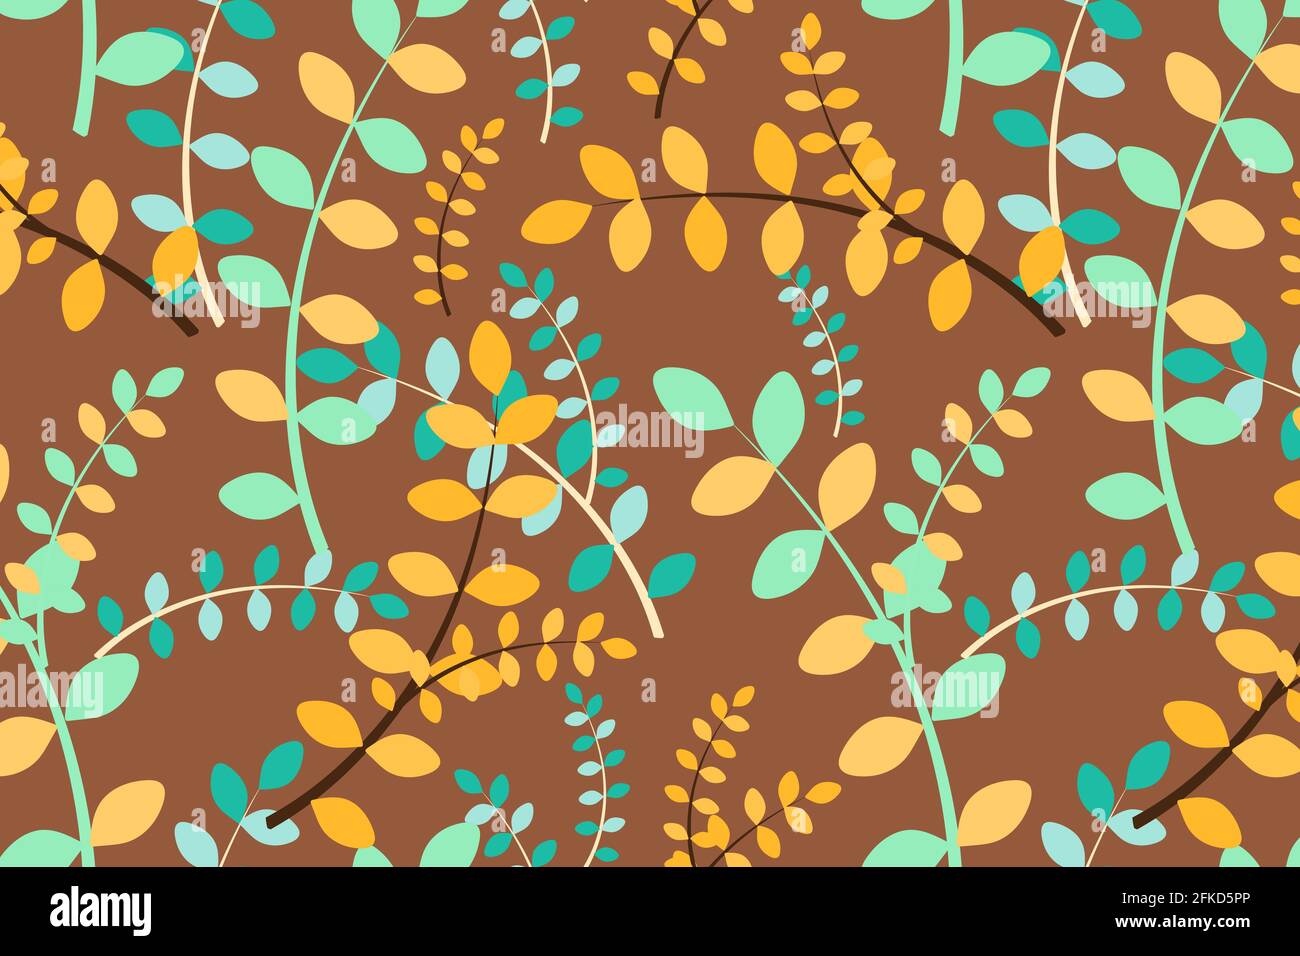 Autumn leaf and branch seamless pattern Stock Vector